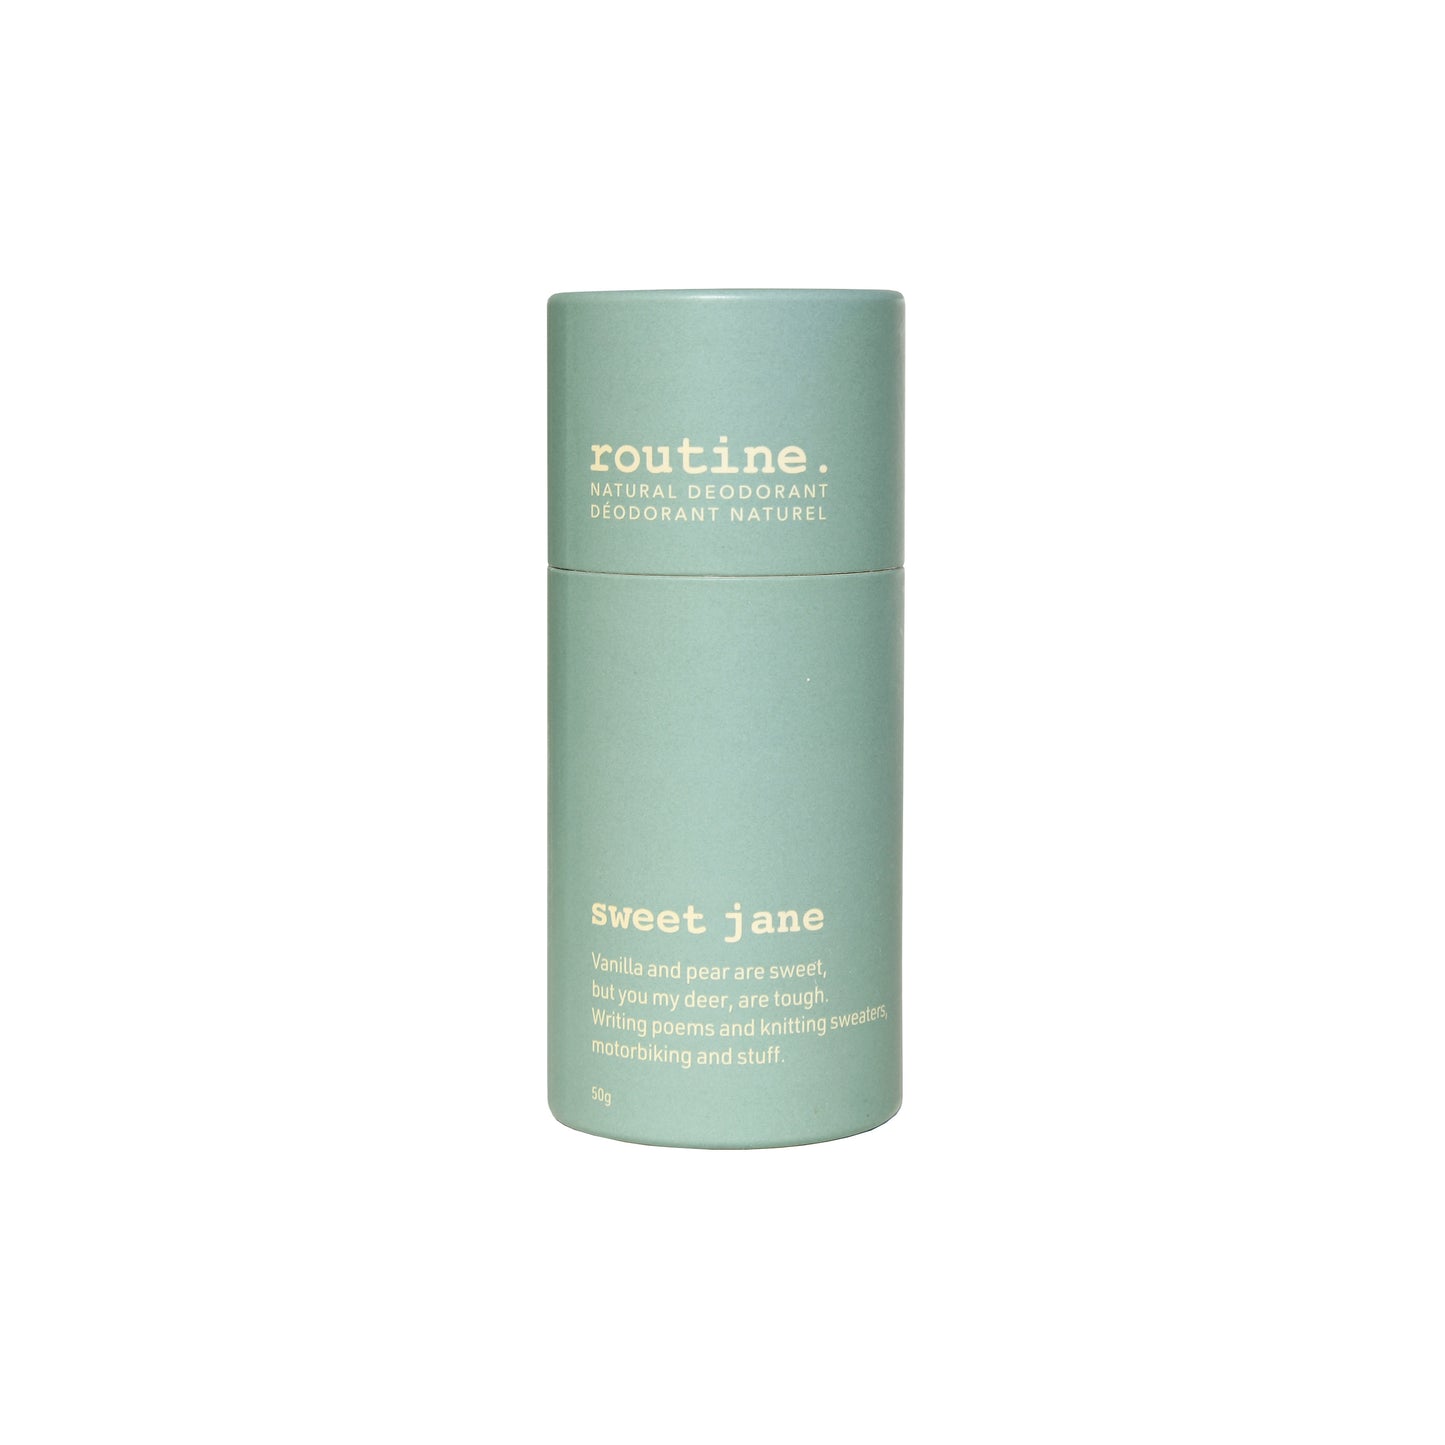 Routine Deodorant - Stick - "Sweet Jane" scent - SUGARED, WARM & ENDEARING. Vanilla, Rose, Cinnamon & Tonka  in a light teal paper deodorant stick displayed on a white background.